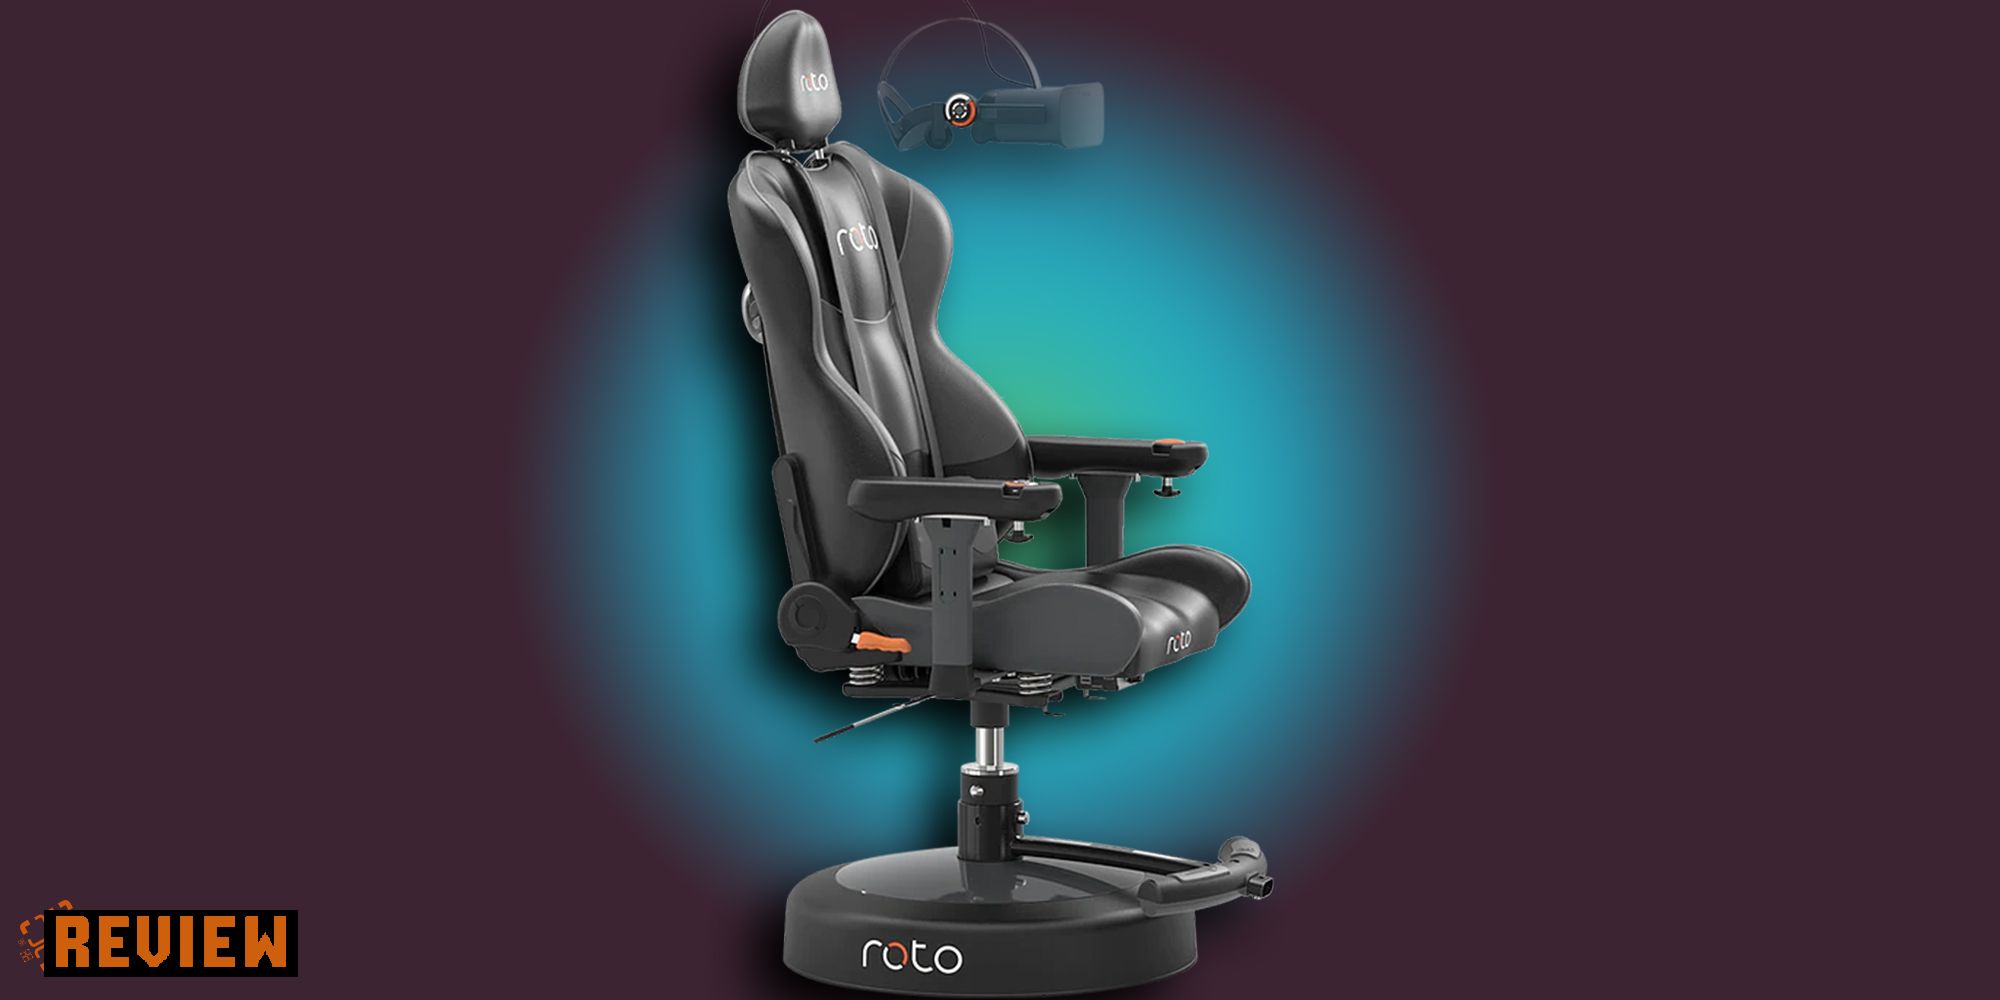 Image of Roto VR Chair.